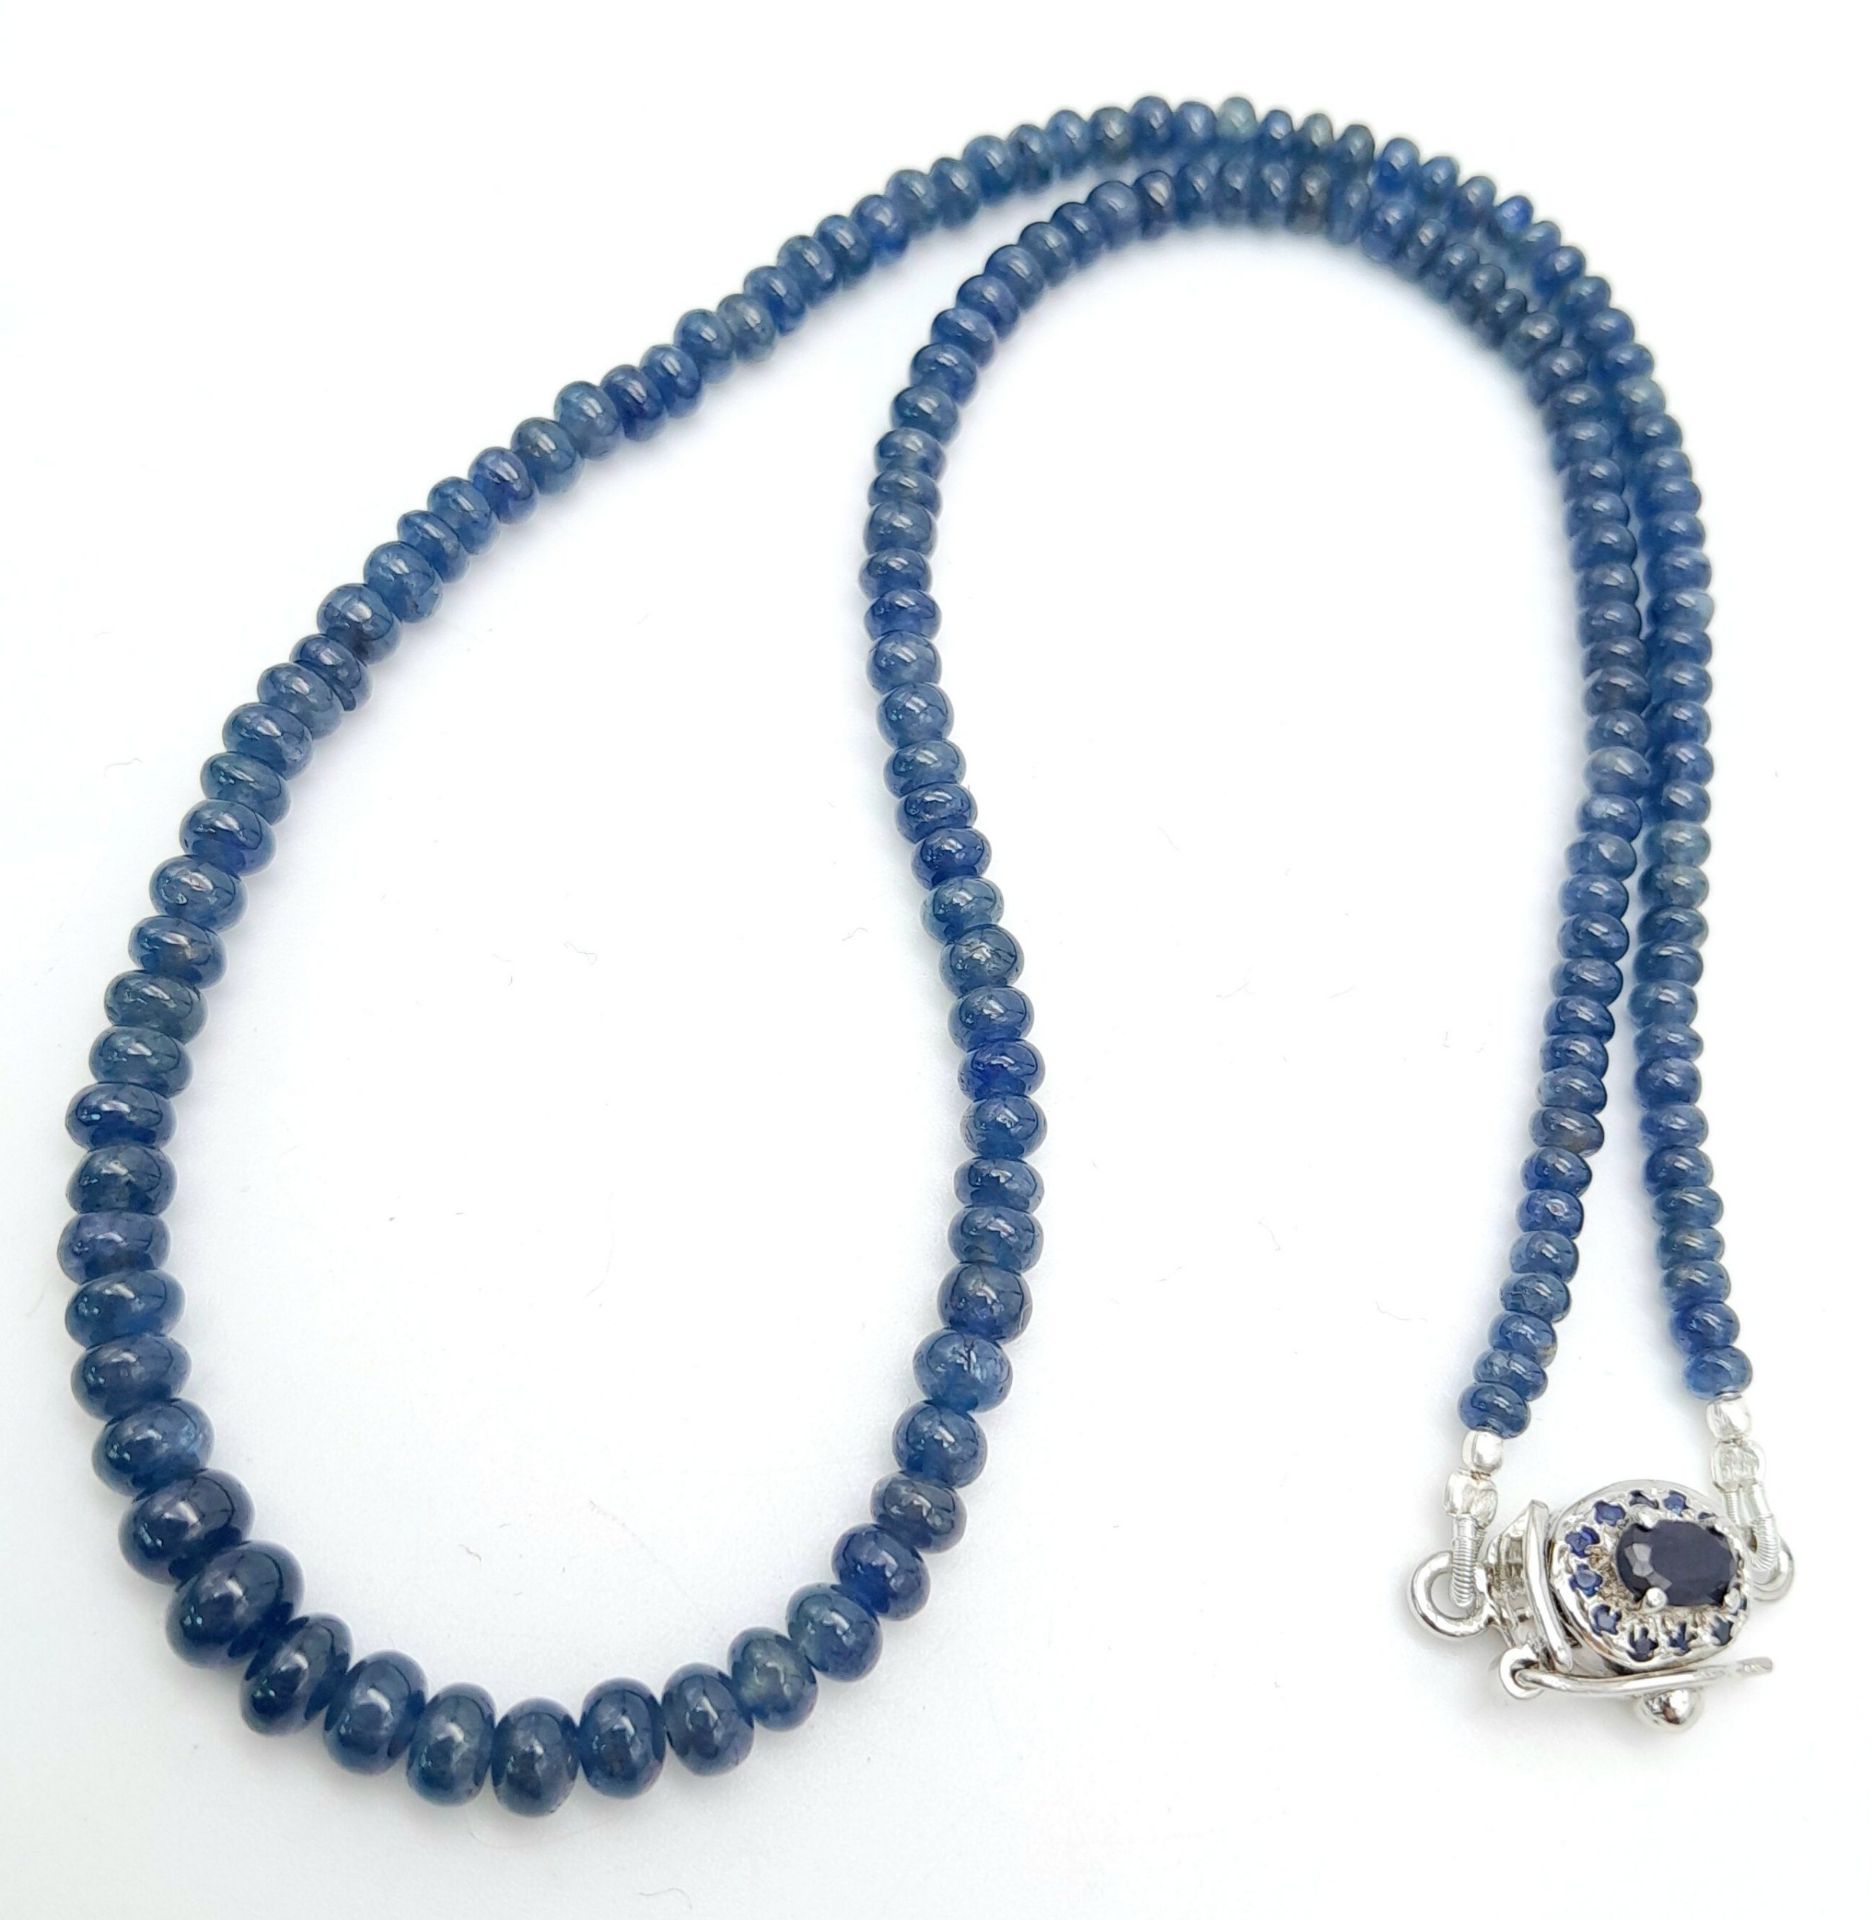 A 115ctw Blue Sapphire Small Rondelle Single Strand Necklace - with Sapphire and 925 Silver clasp. - Image 2 of 5